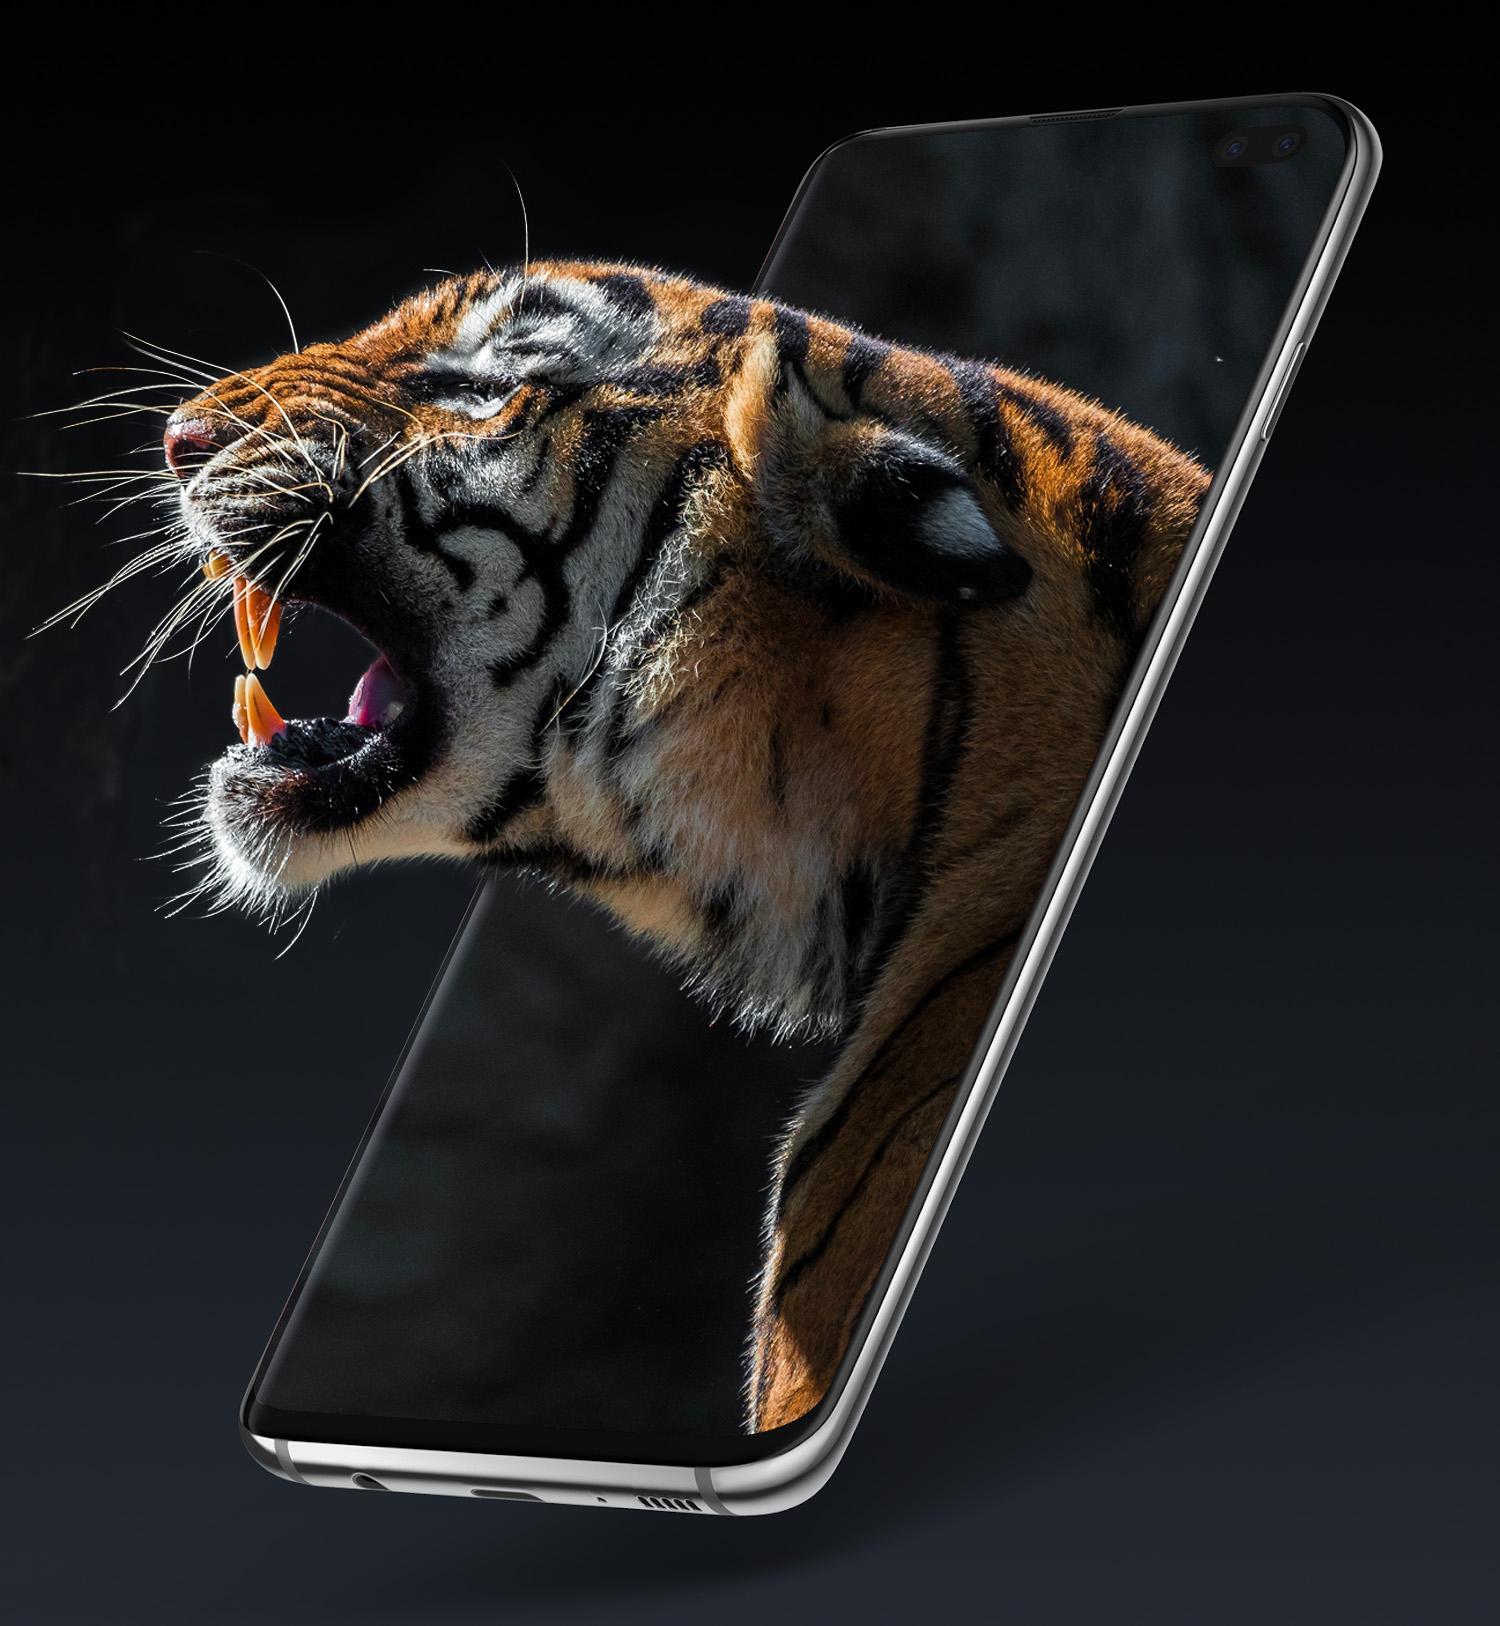  3D Wallpaper Parallax Free Apk  Learn more here 